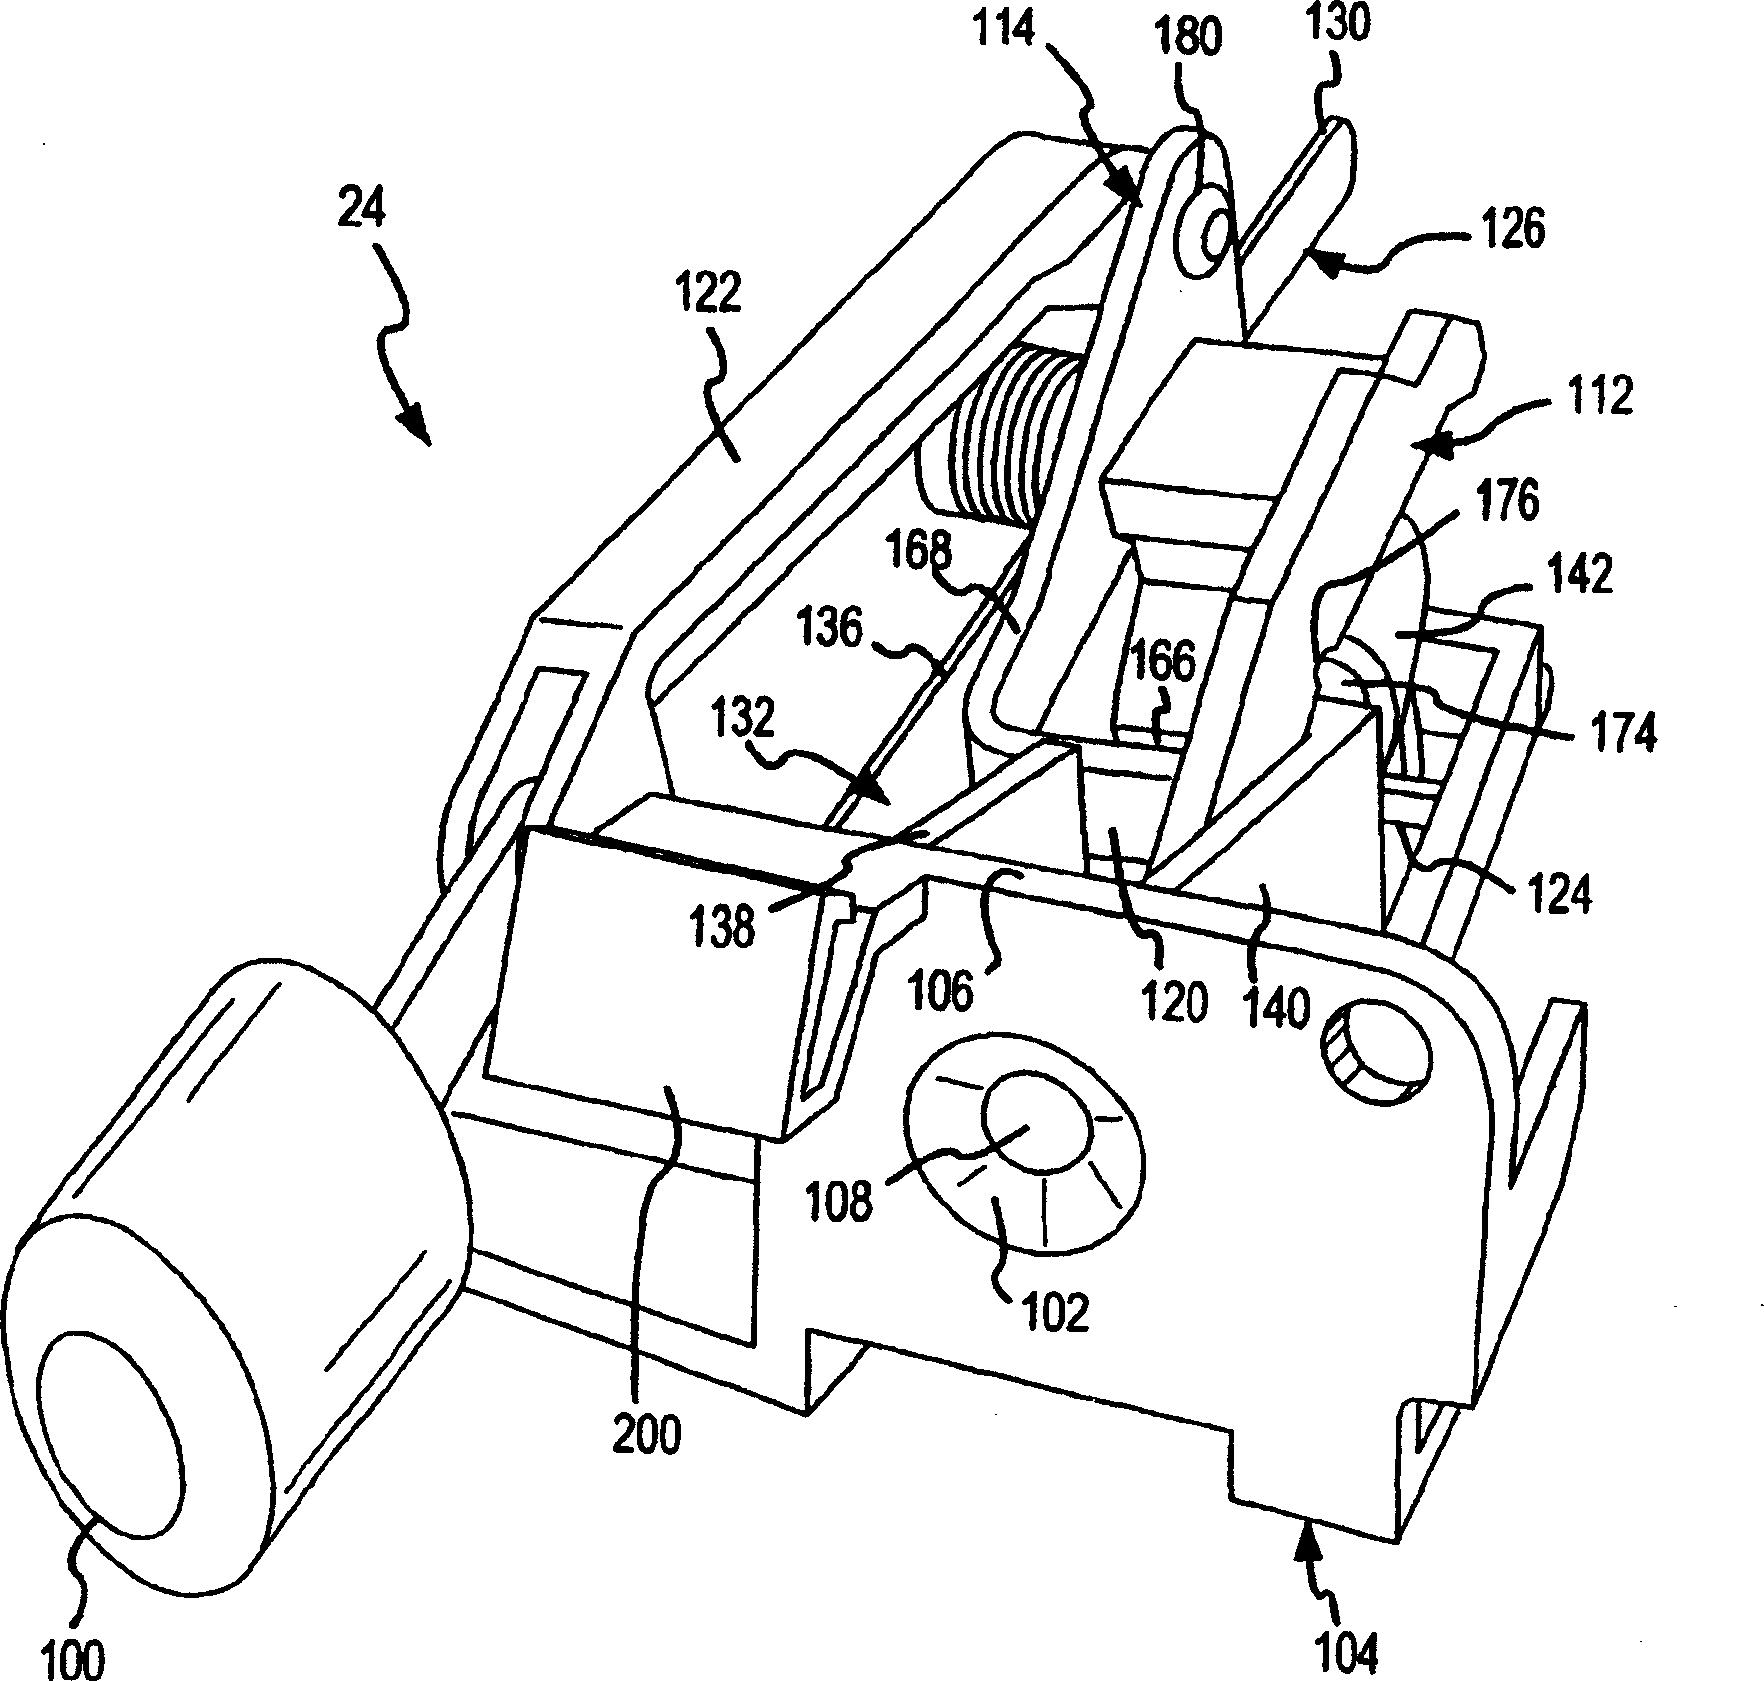 Monopolar electrosurgical multi-plug connector device and method which accepts multiple different connection plugs